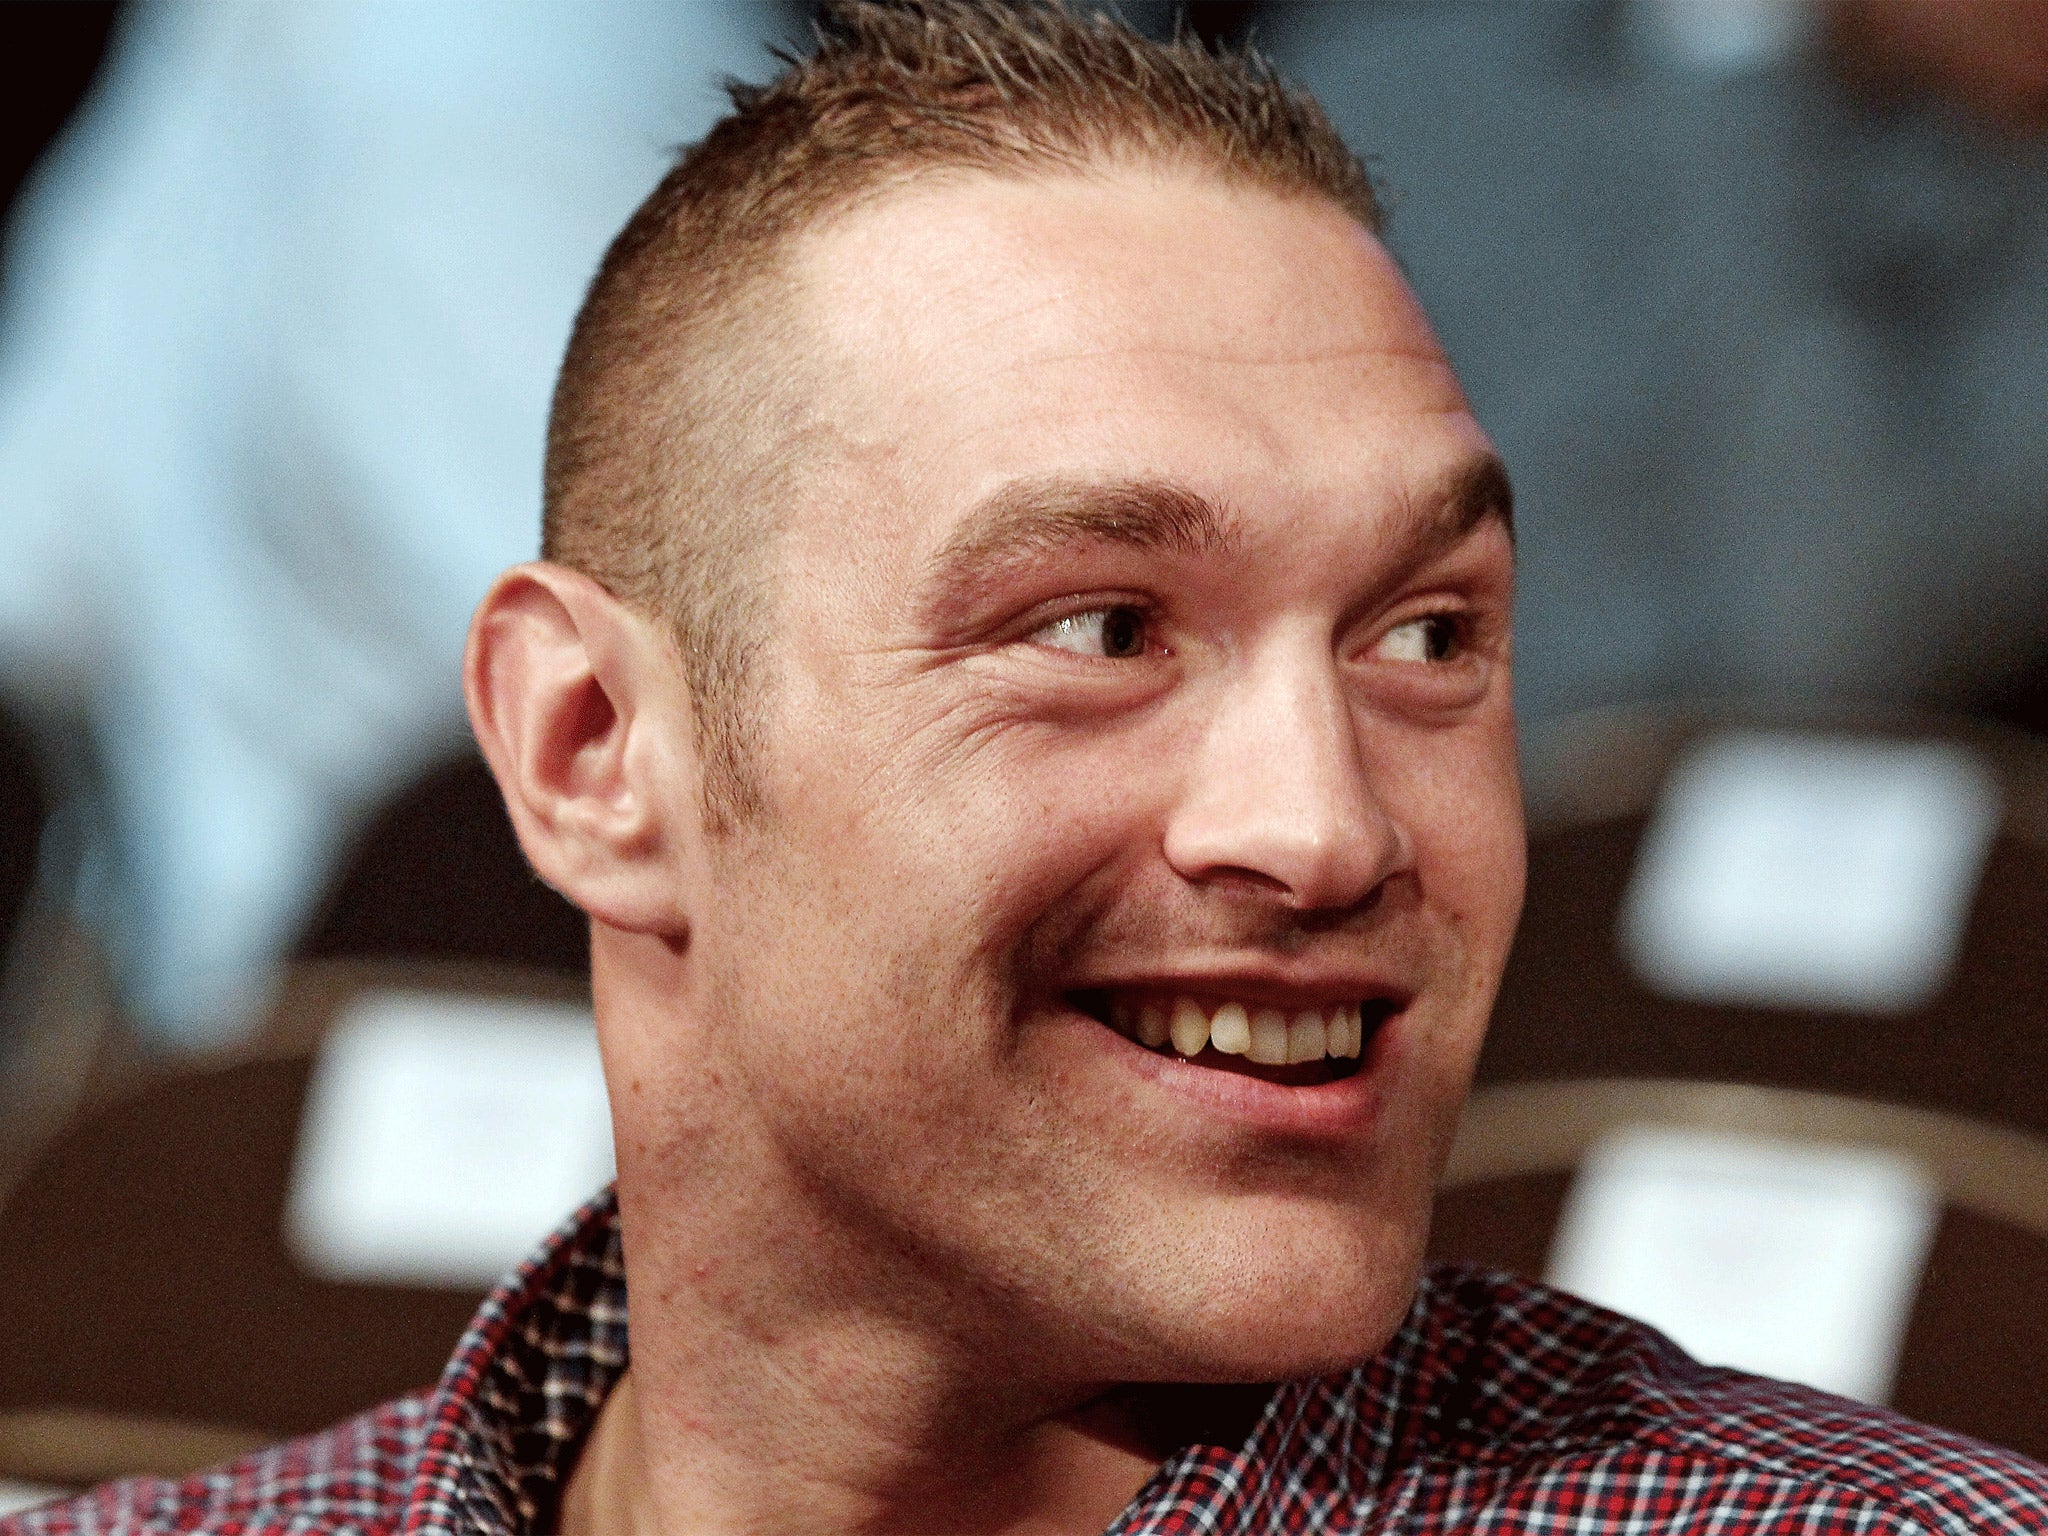 Tyson Fury will get his first chance to wow an American audience